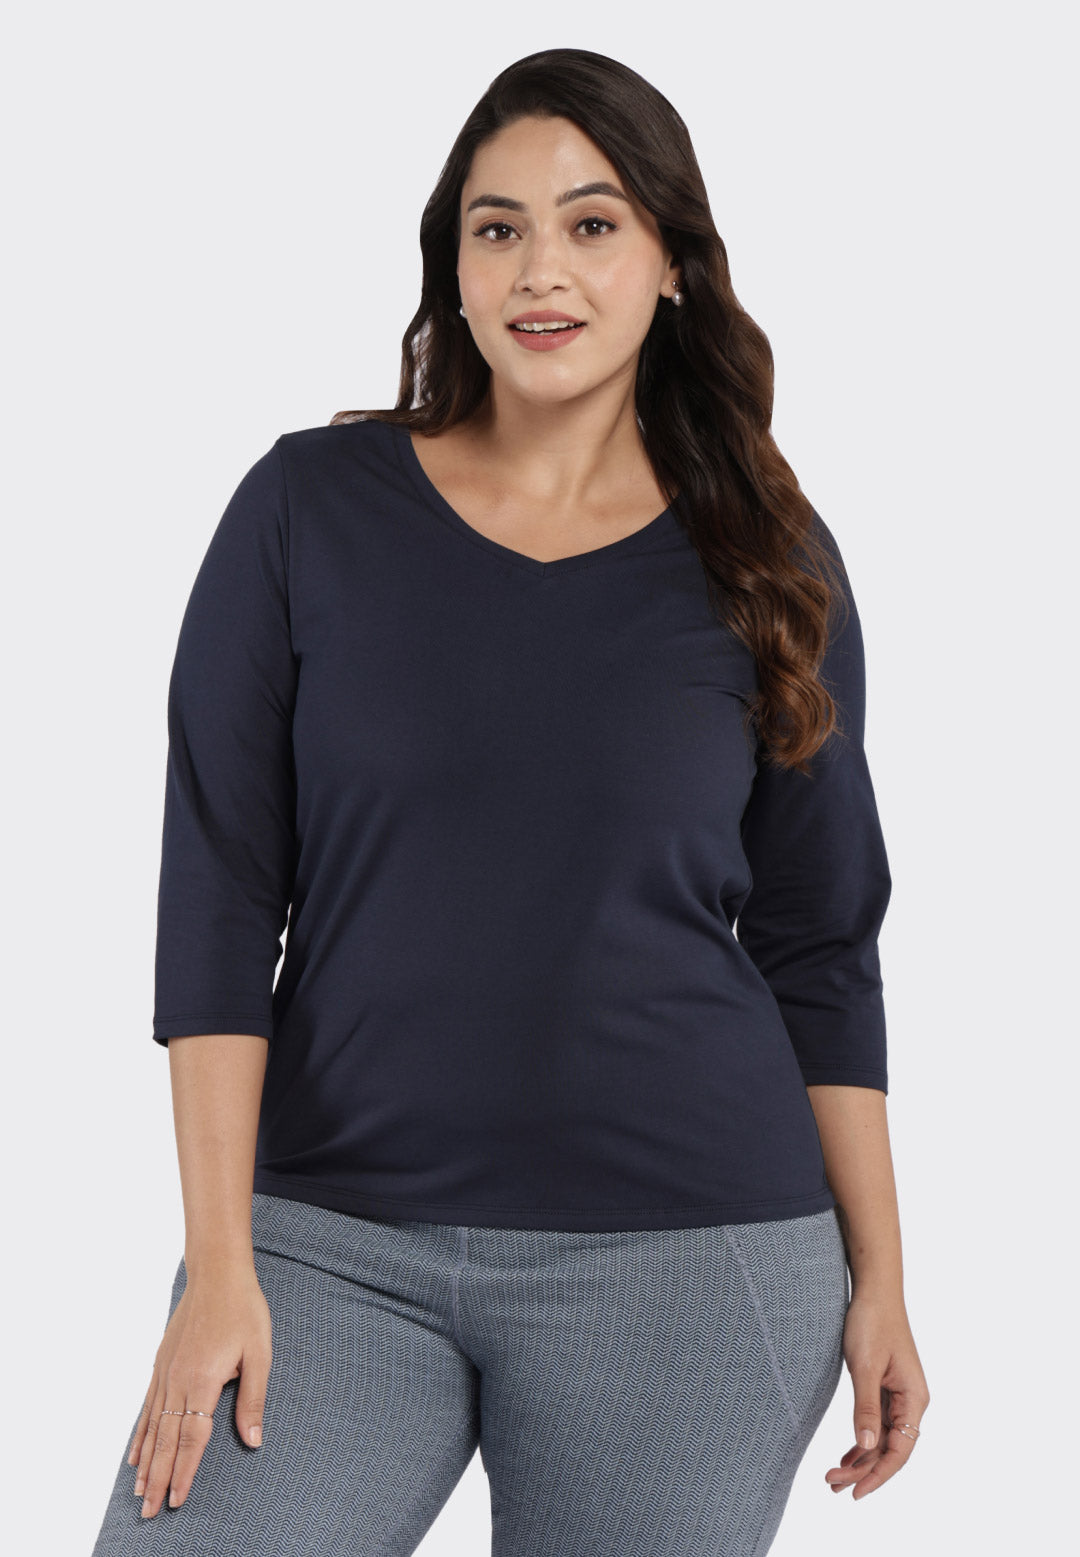 BlissClub Women Fit-Me-Right Tees, Apple Shaped Body, Active Apple, Stretchy BambooLux Fabric, V-Neck, High-Low Hem